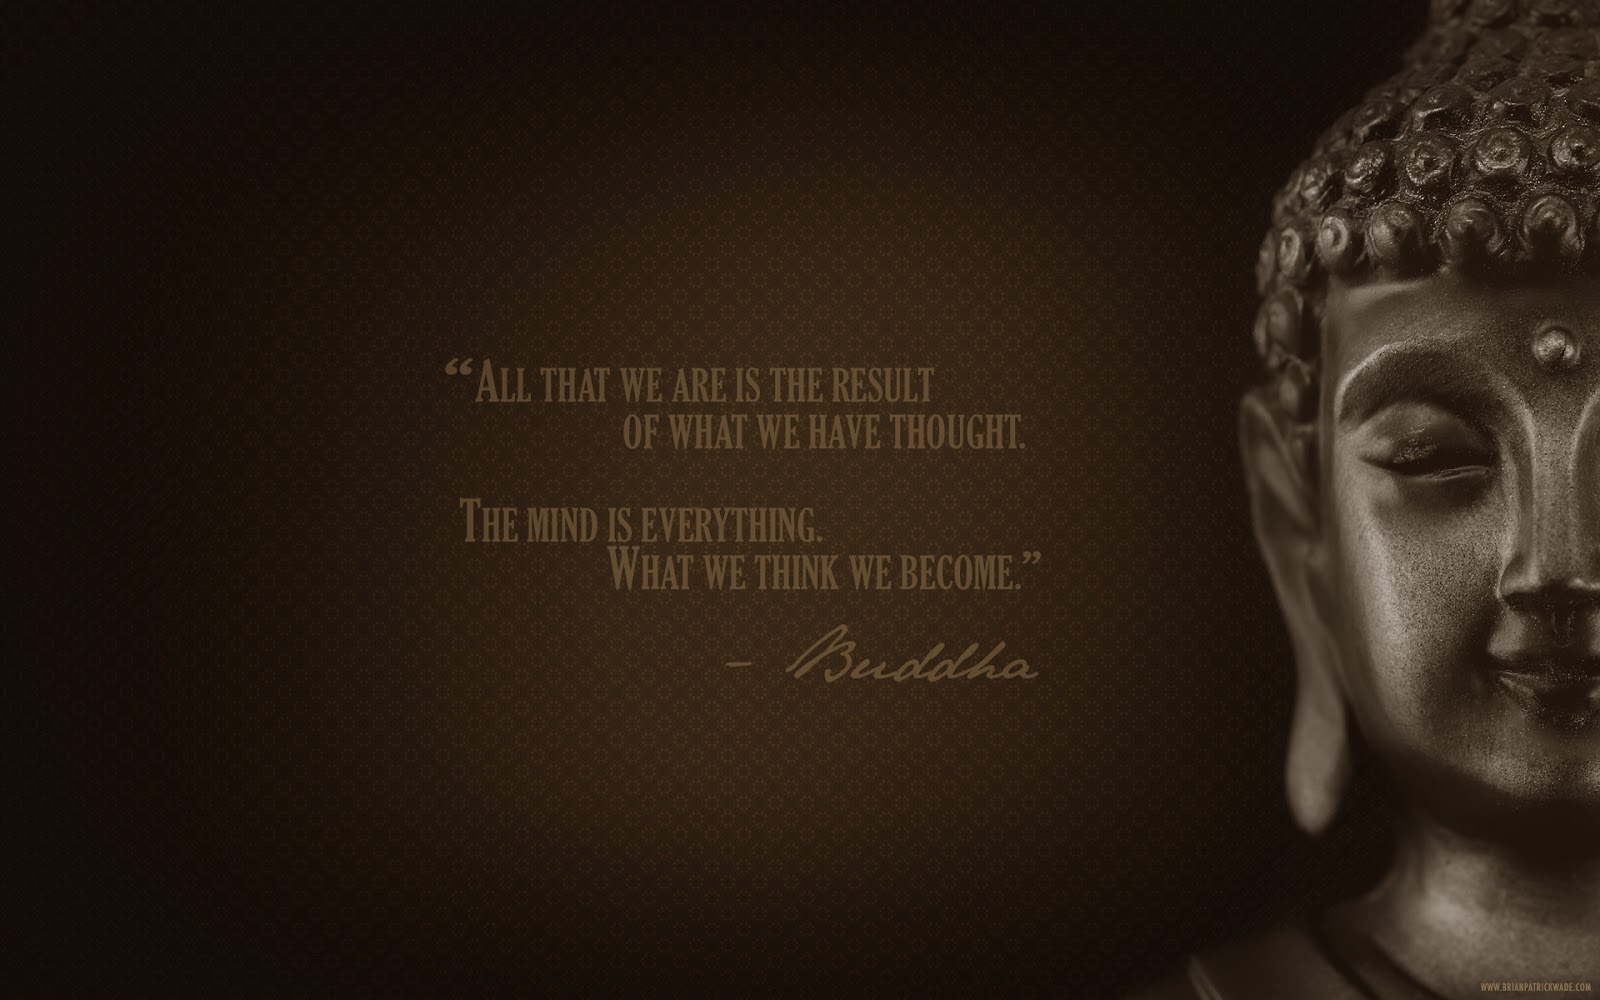 WALLPAPER WITH POSITIVE QUOTE BY LORD BUDDHA WHAT WE THINK WE BECOME